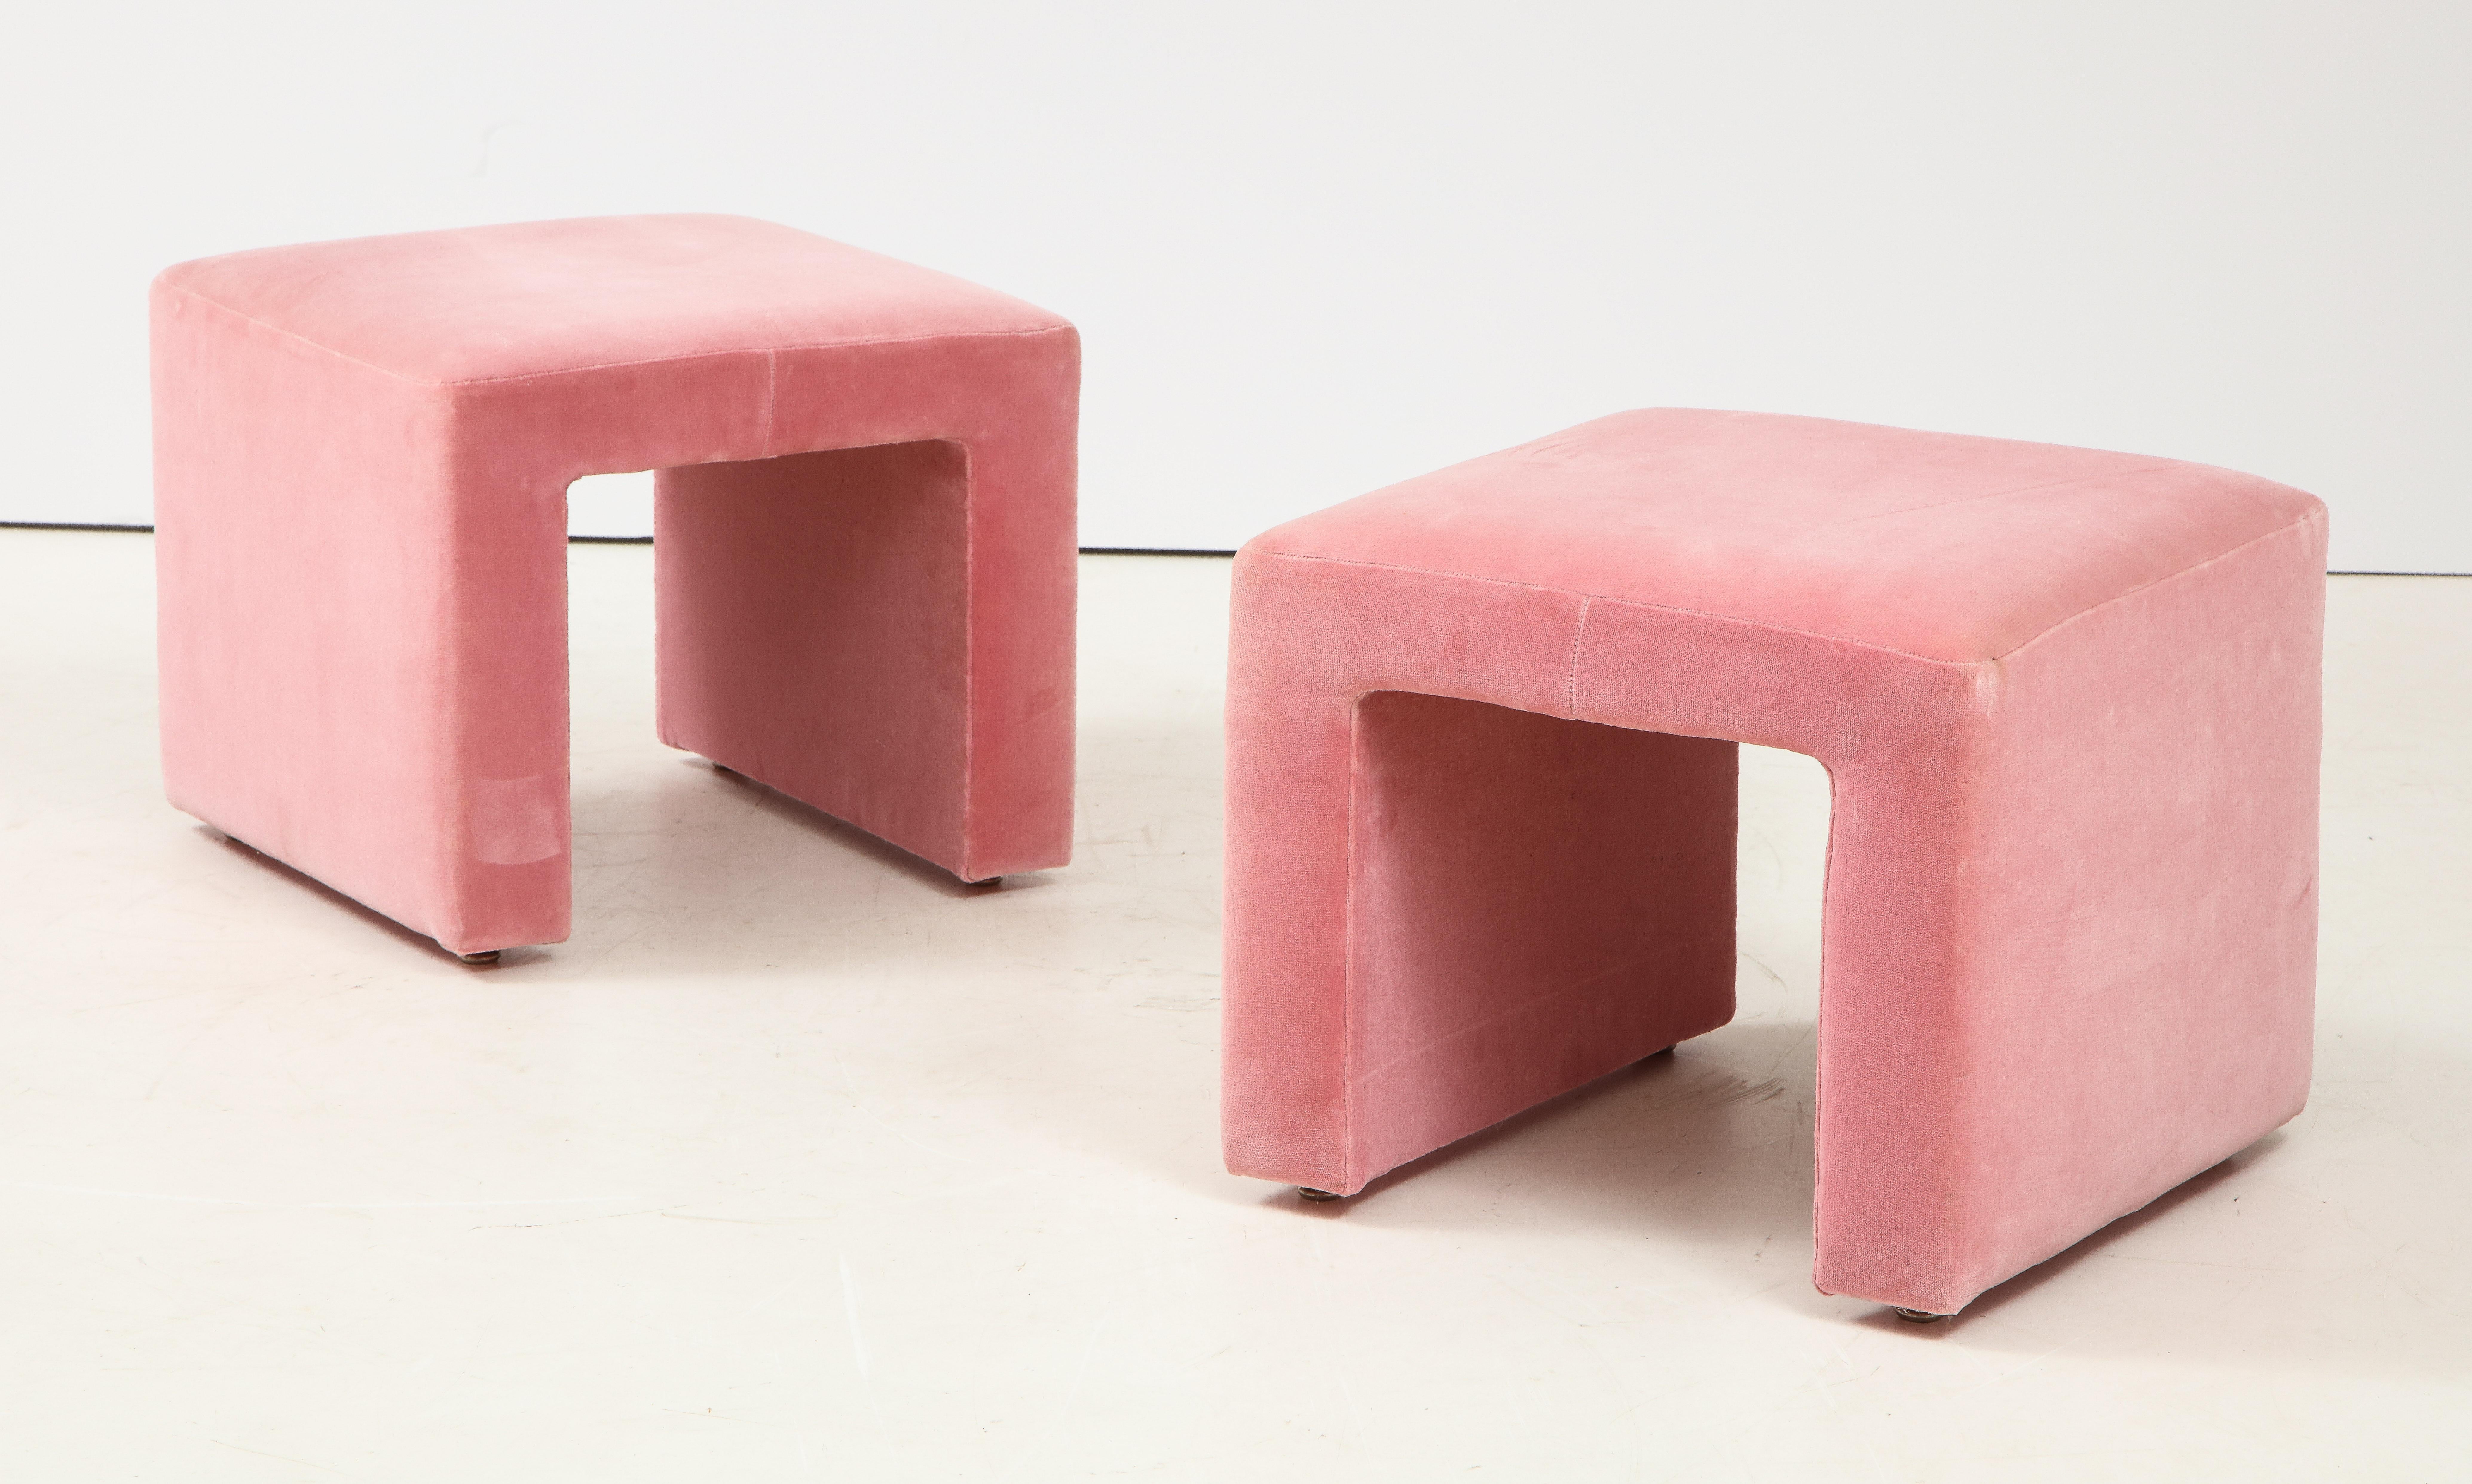 Pair of Hollywood Regency ottomans in a cheerful bubble gum pink cotton velvet.